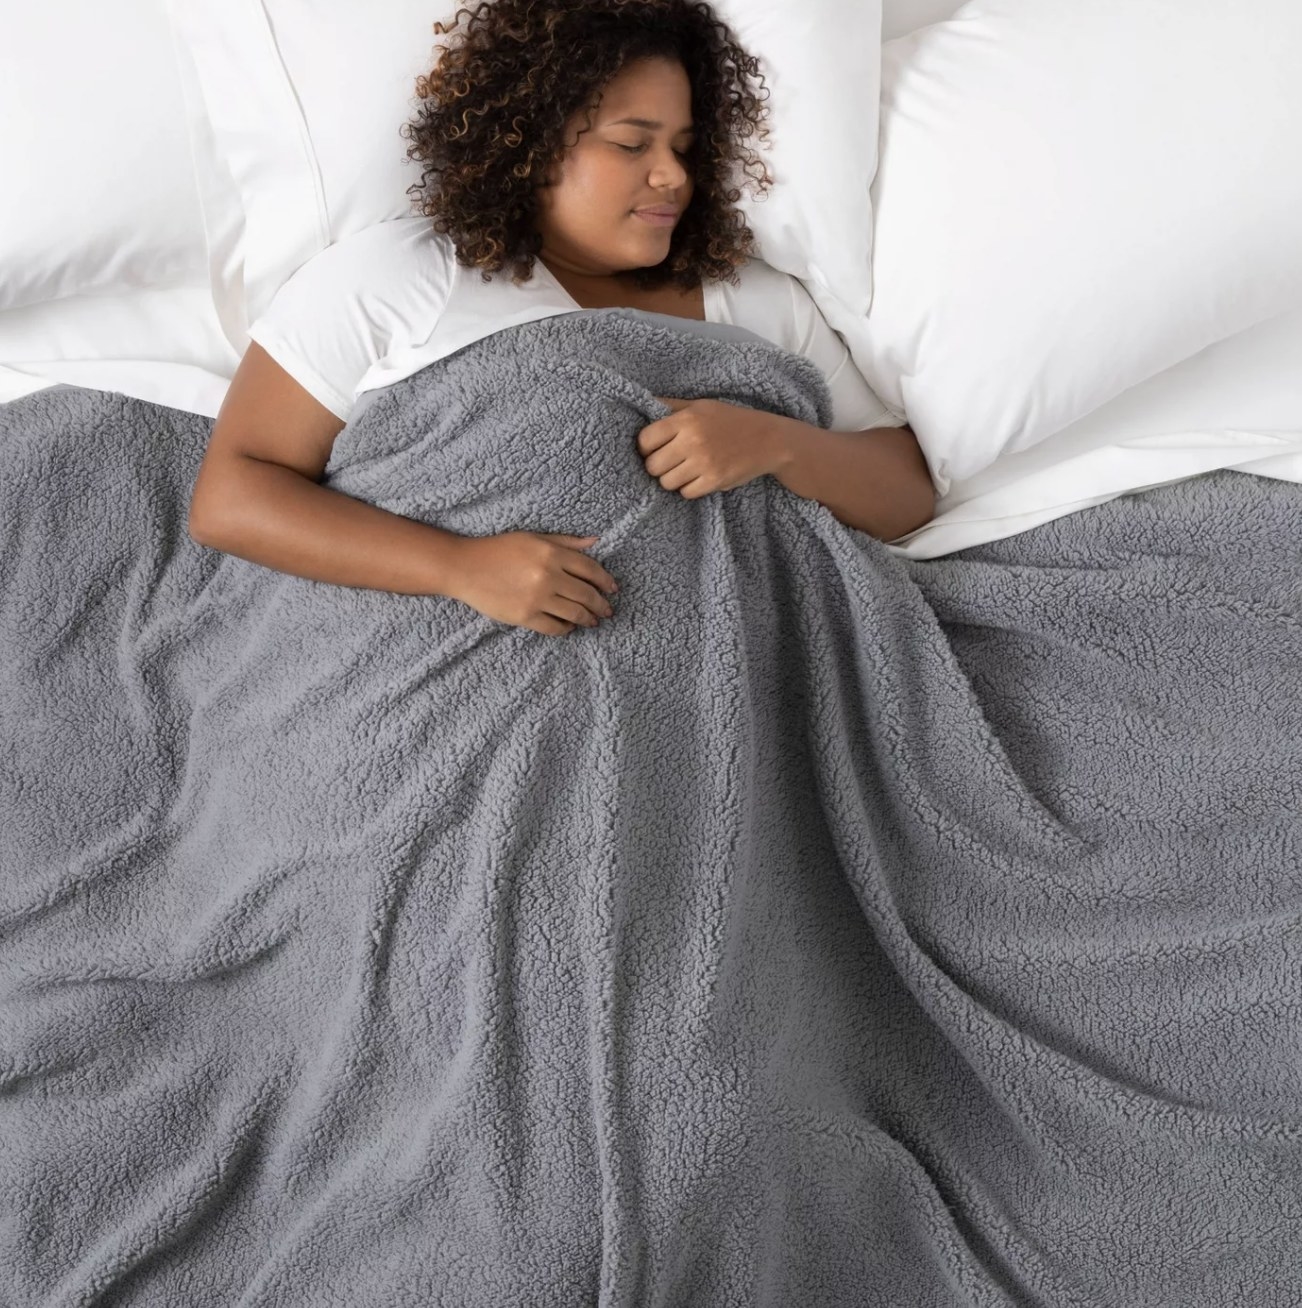 Woman sleeping under the weighted blanket